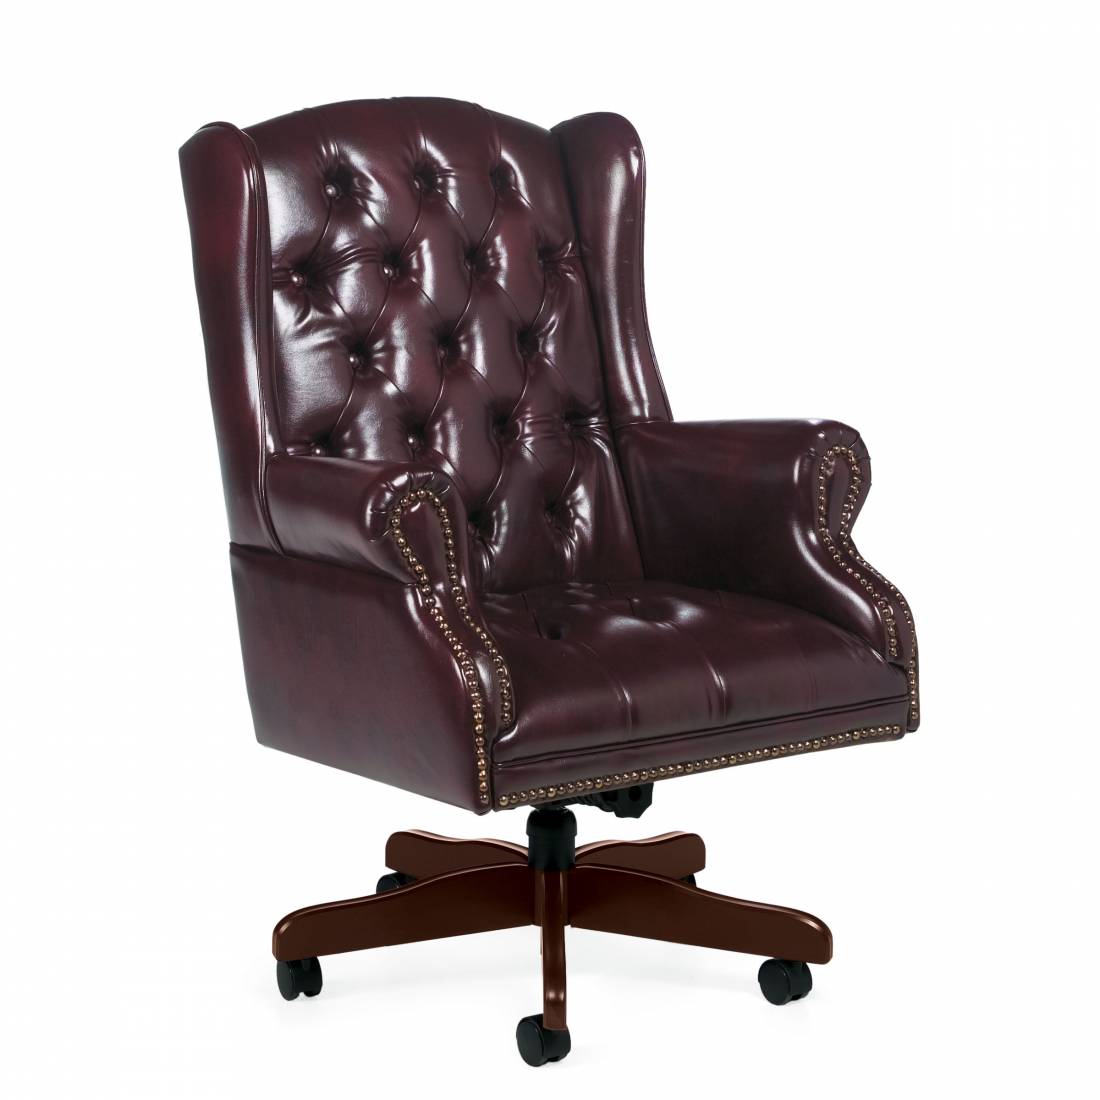 Traditional - Conference Room Chairs | Global